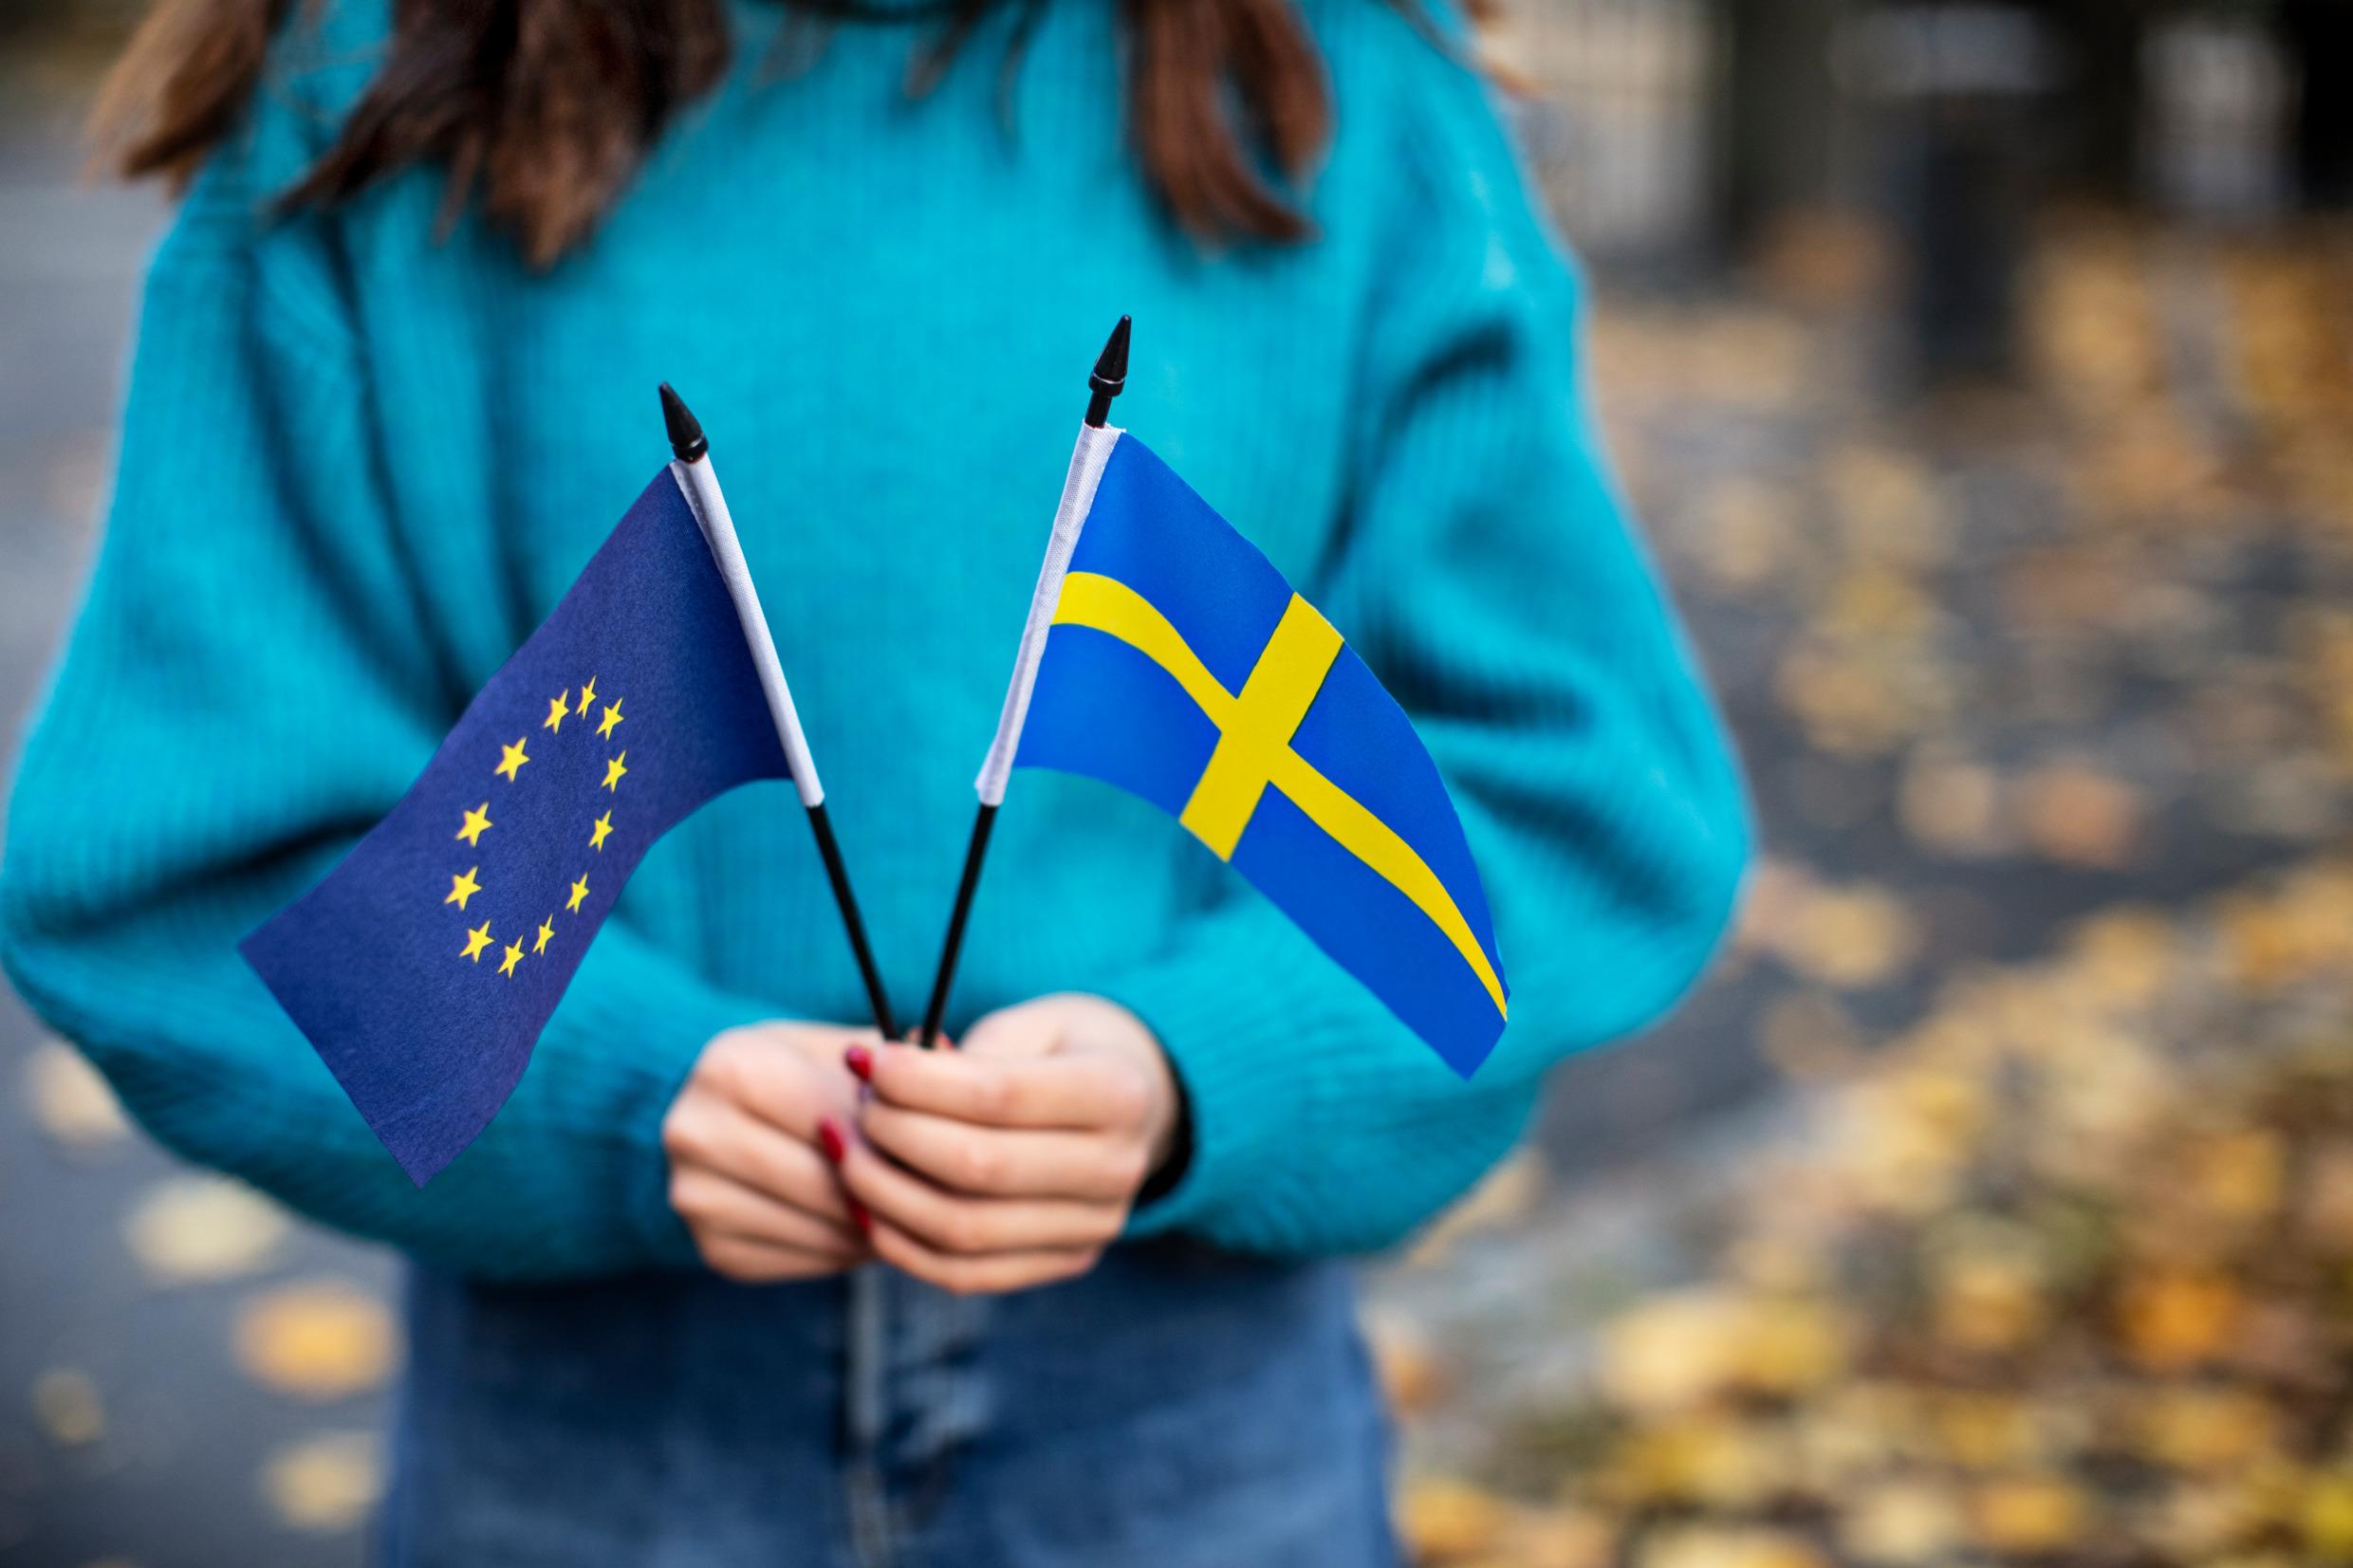 A girl is holding two small paper flags: the Swedish flag and the flag for the European Union, both blue and yellow.